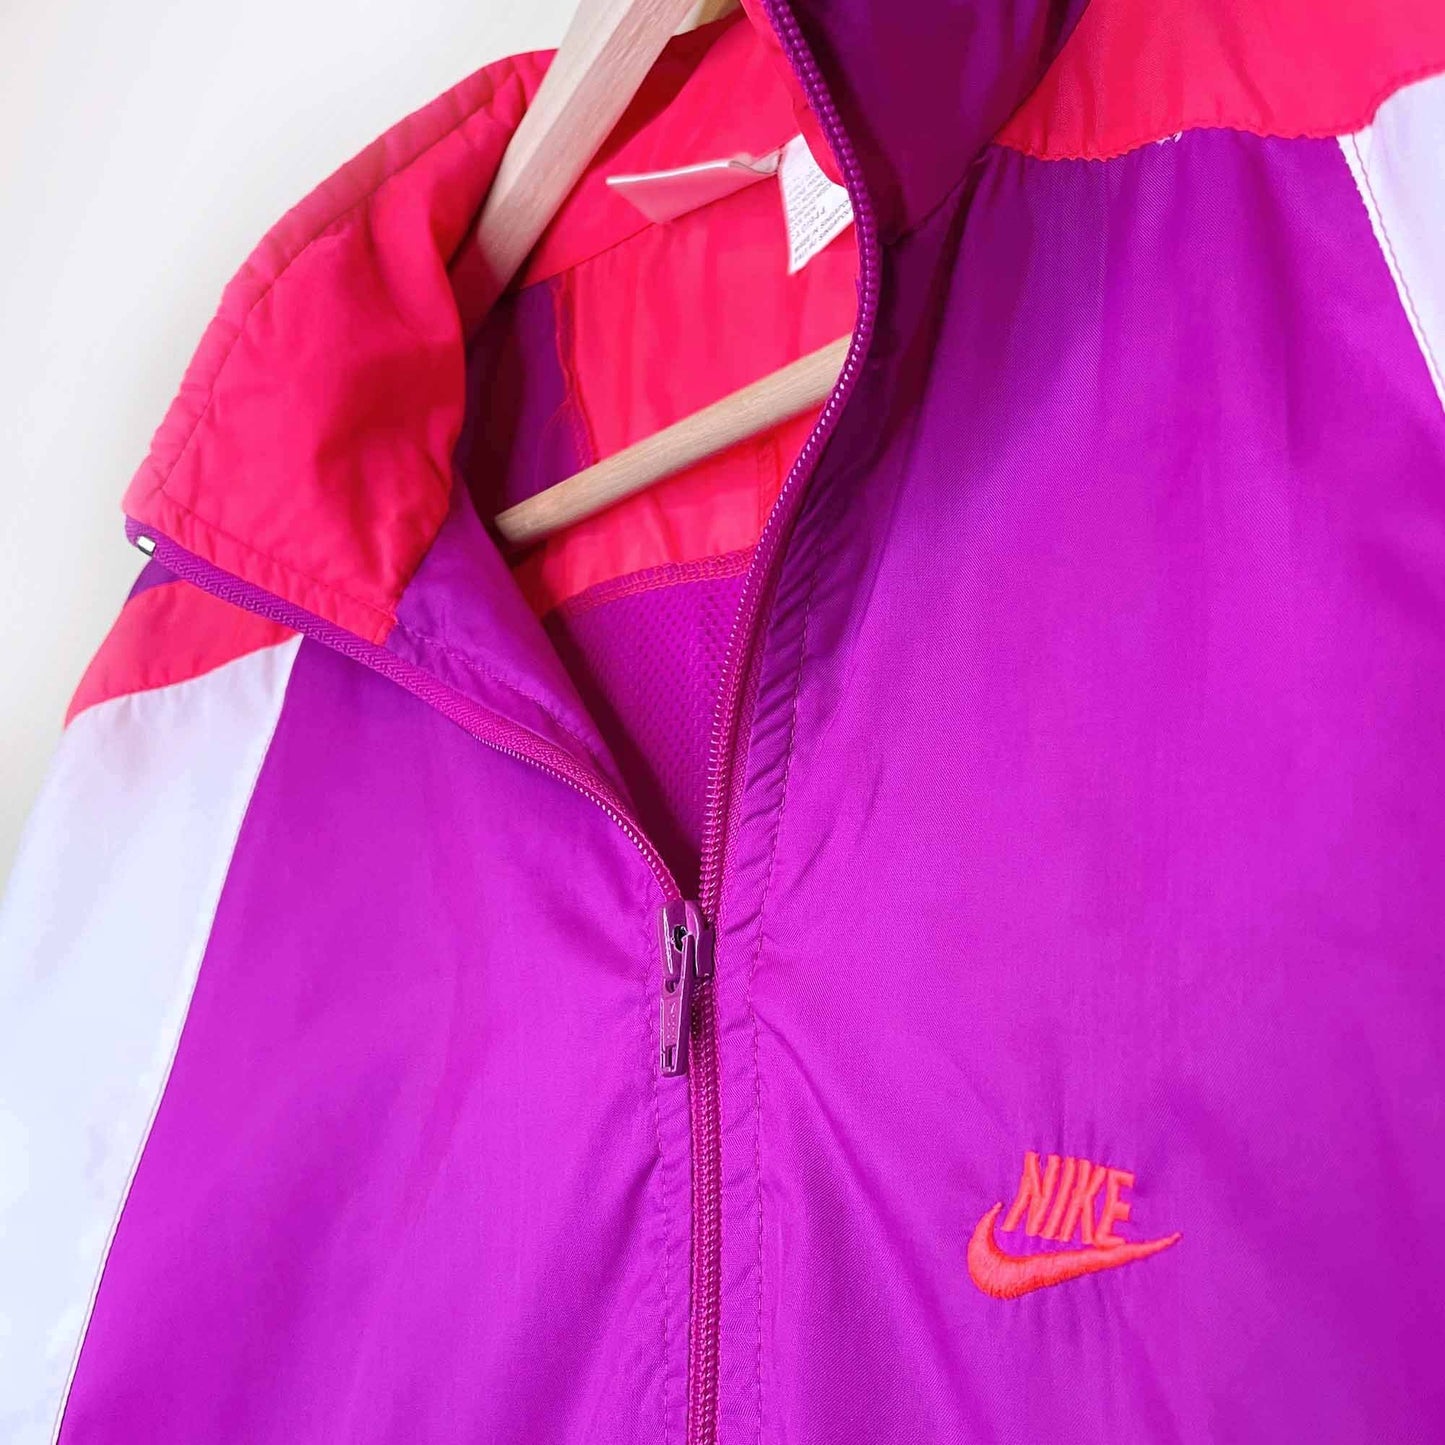 vintage 90's nike colourblock windbreaker with packable hood - size large